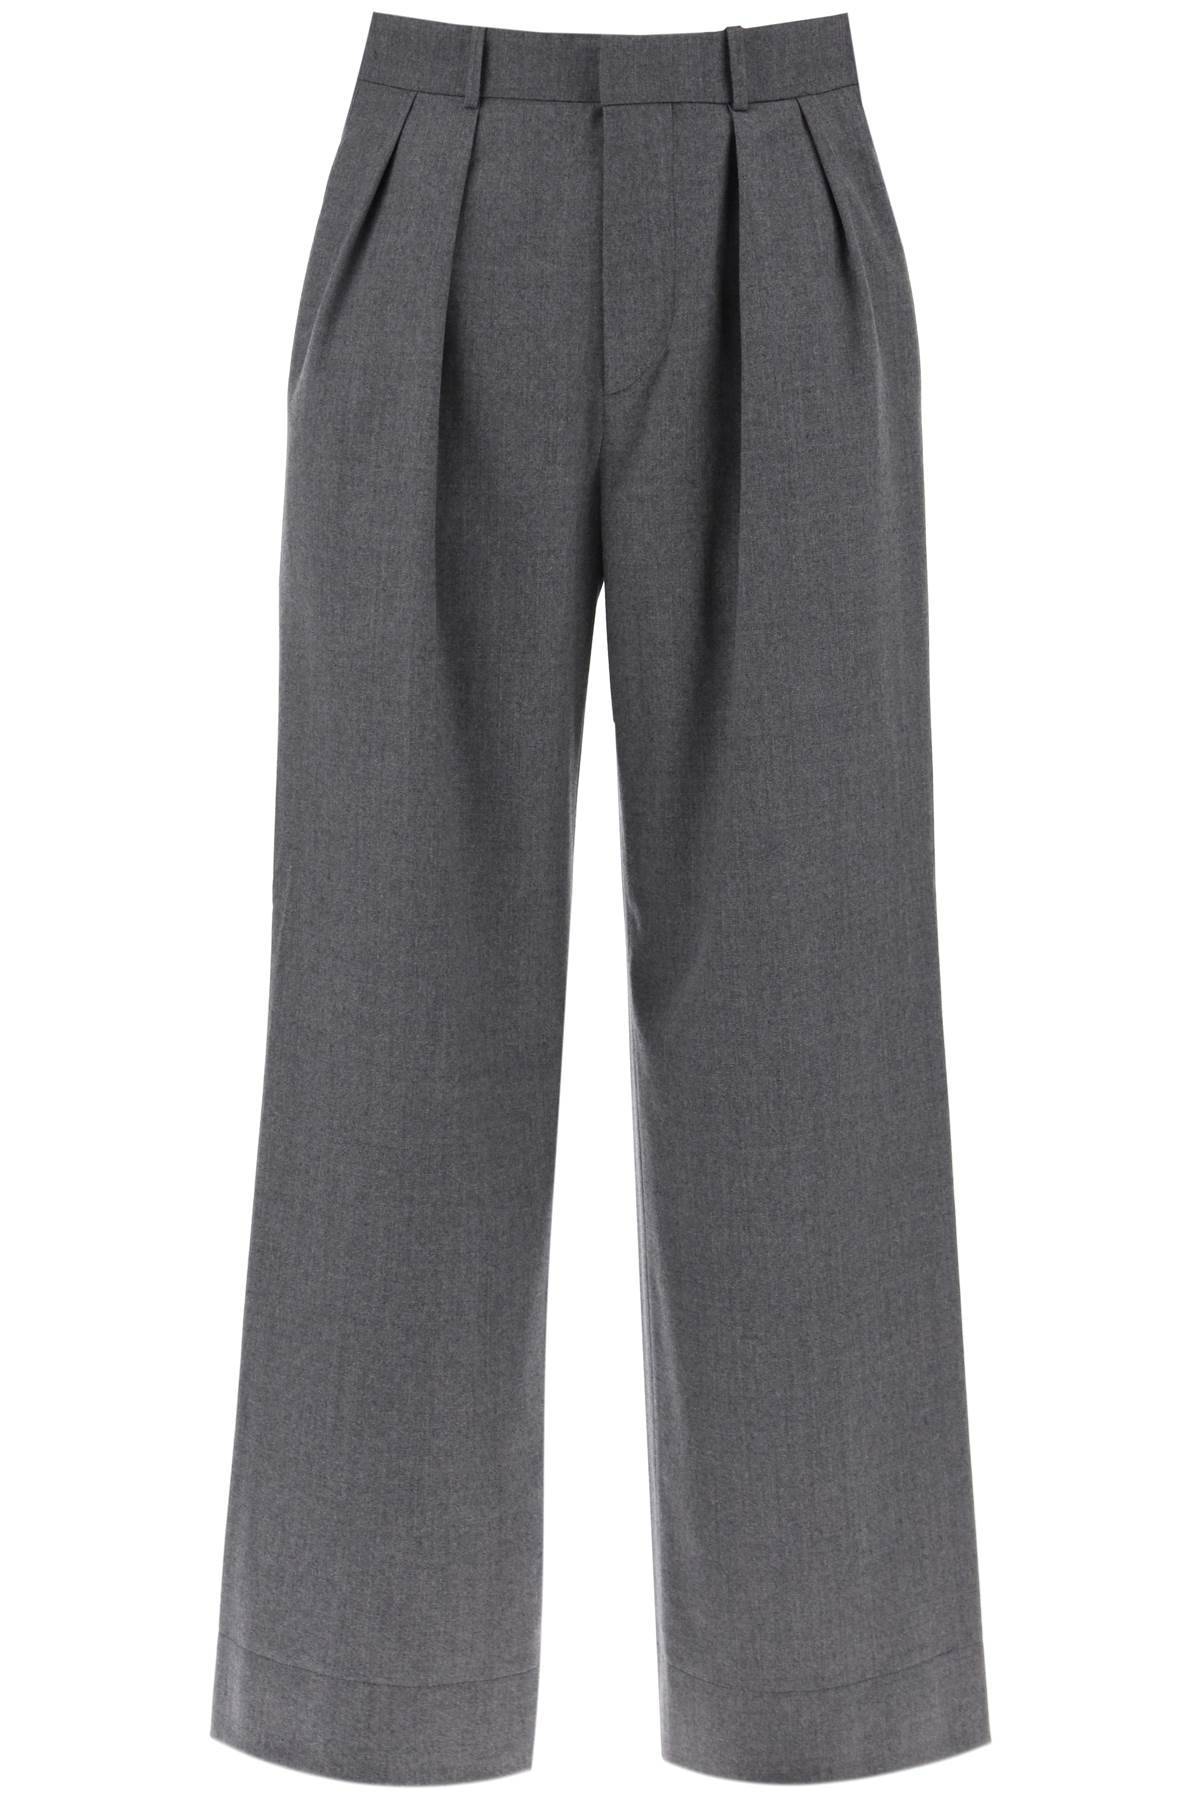 WARDROBE.NYC WARDROBE. NYC wide leg flannel trousers for men or